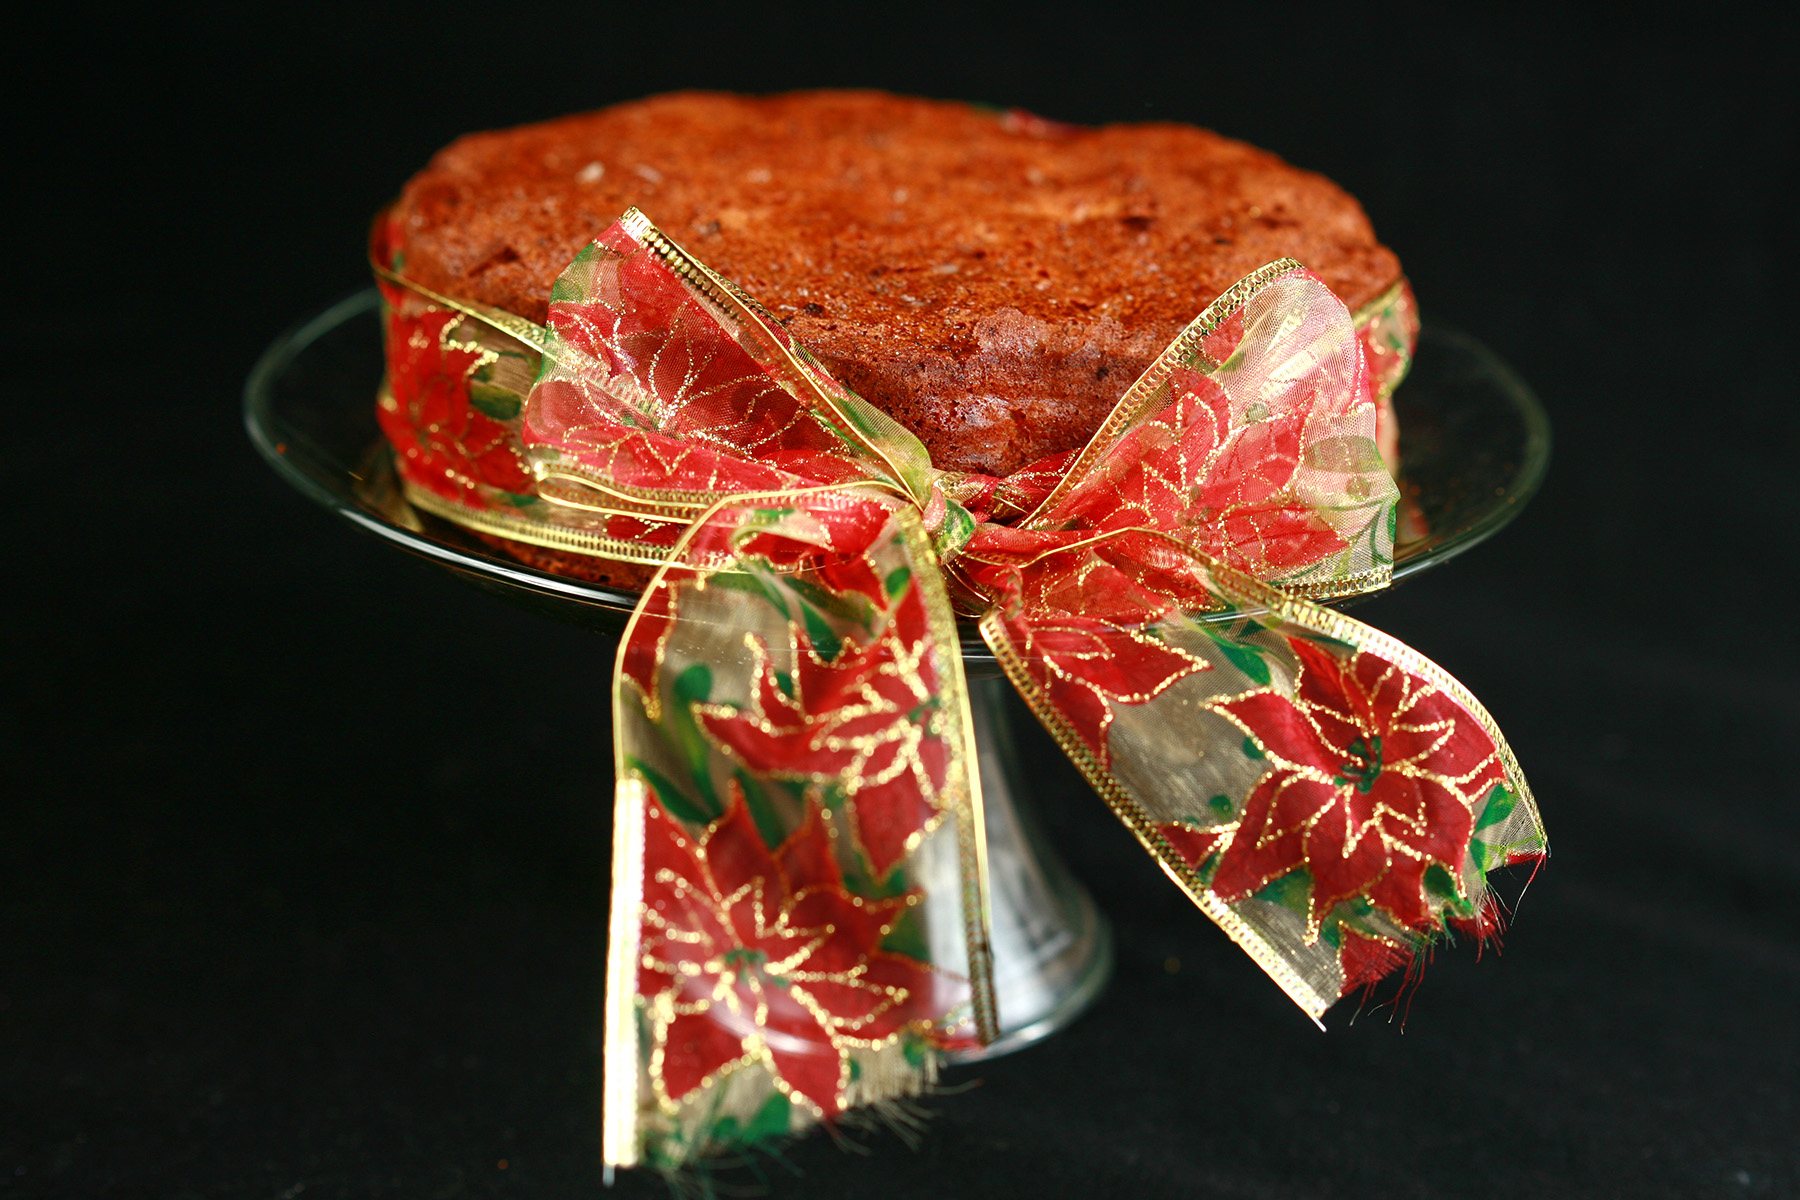 A round fruitcake, tied with a festive red, green, and gold bow.